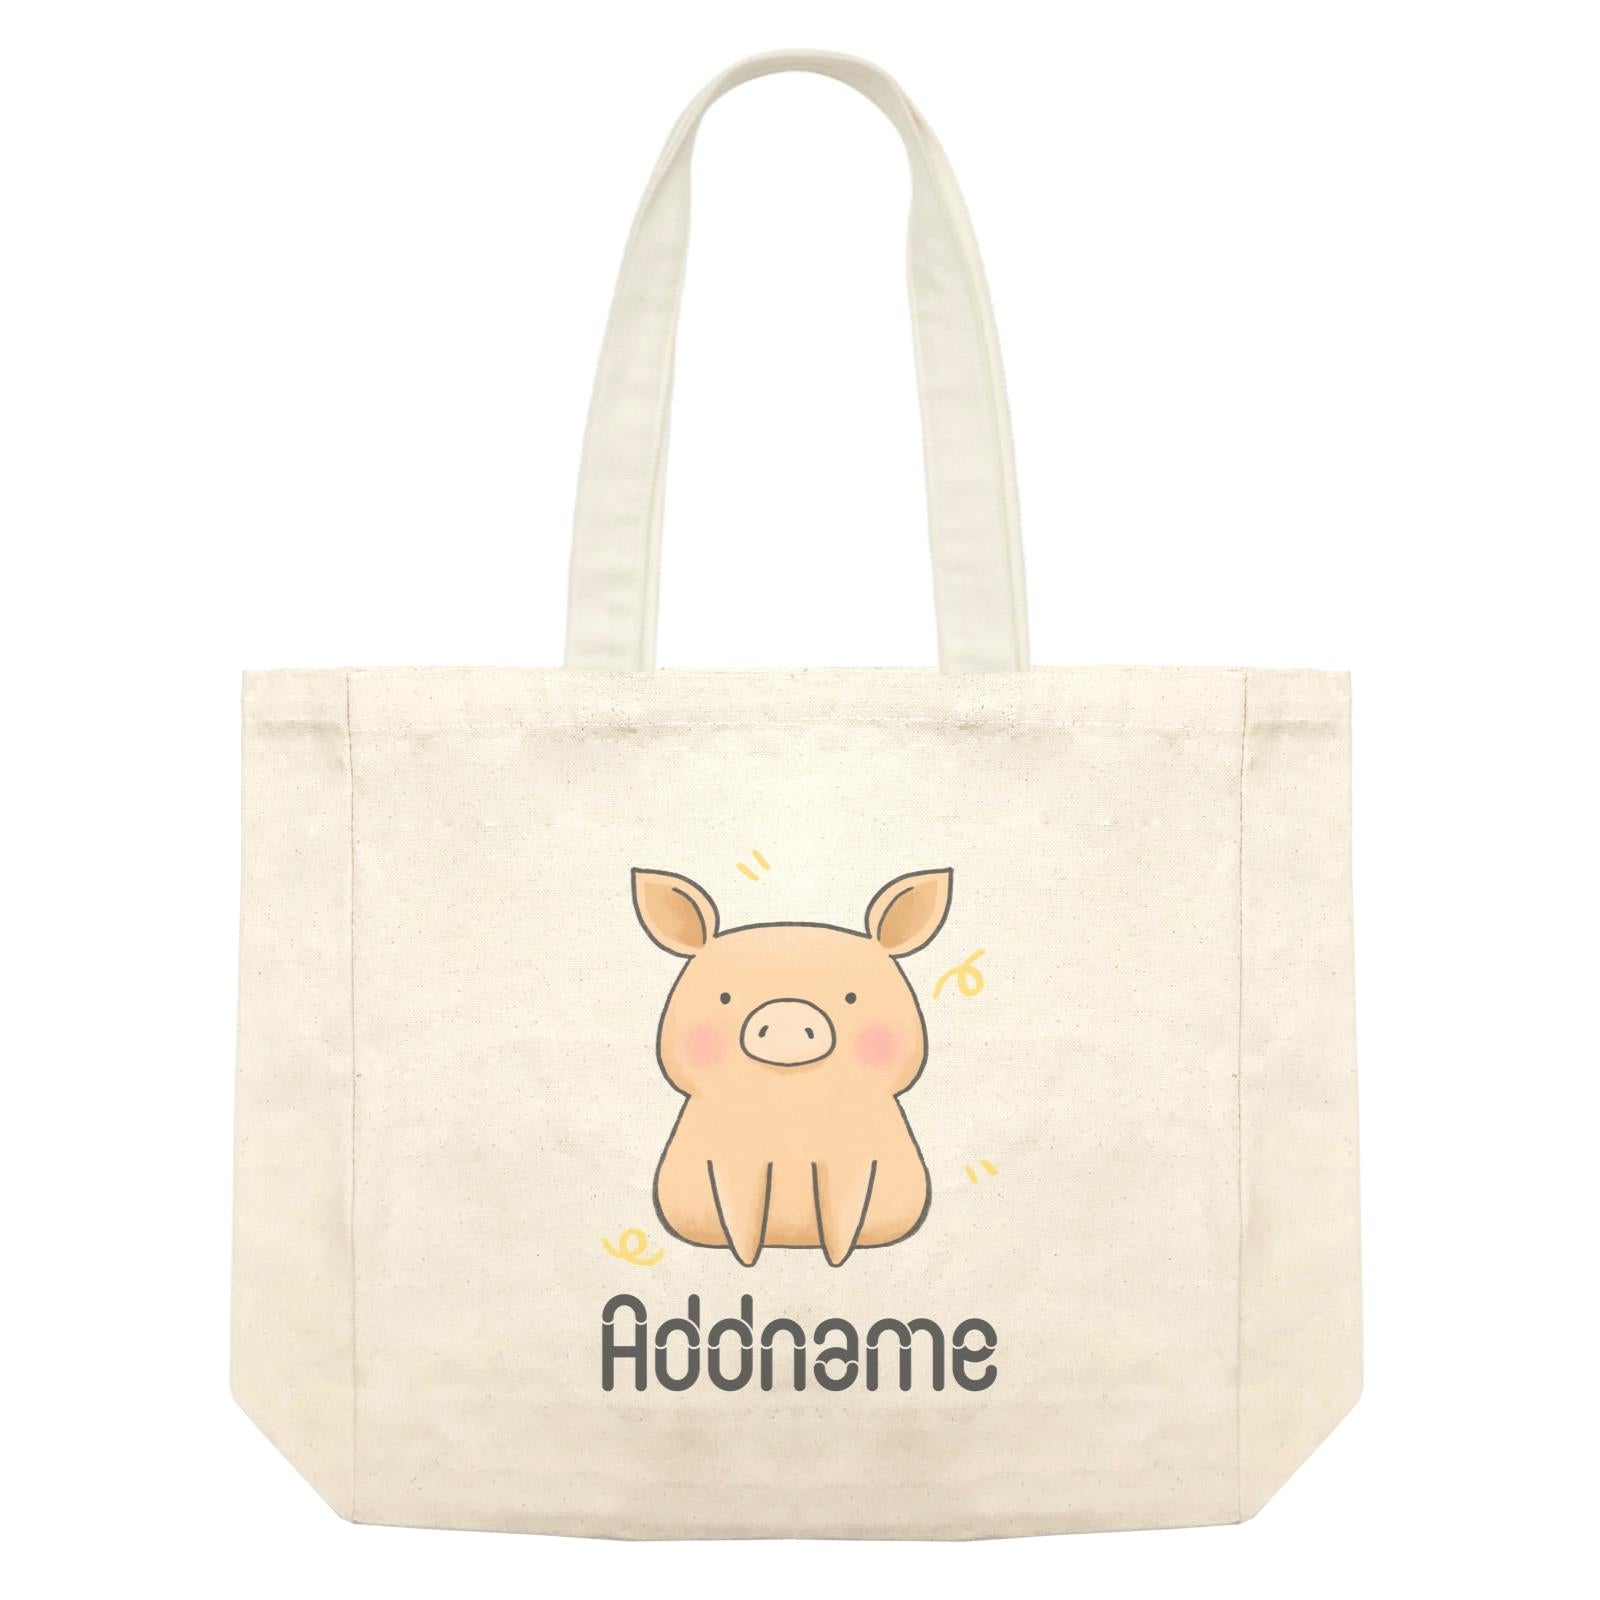 Cute Hand Drawn Style Pig Addname Shopping Bag